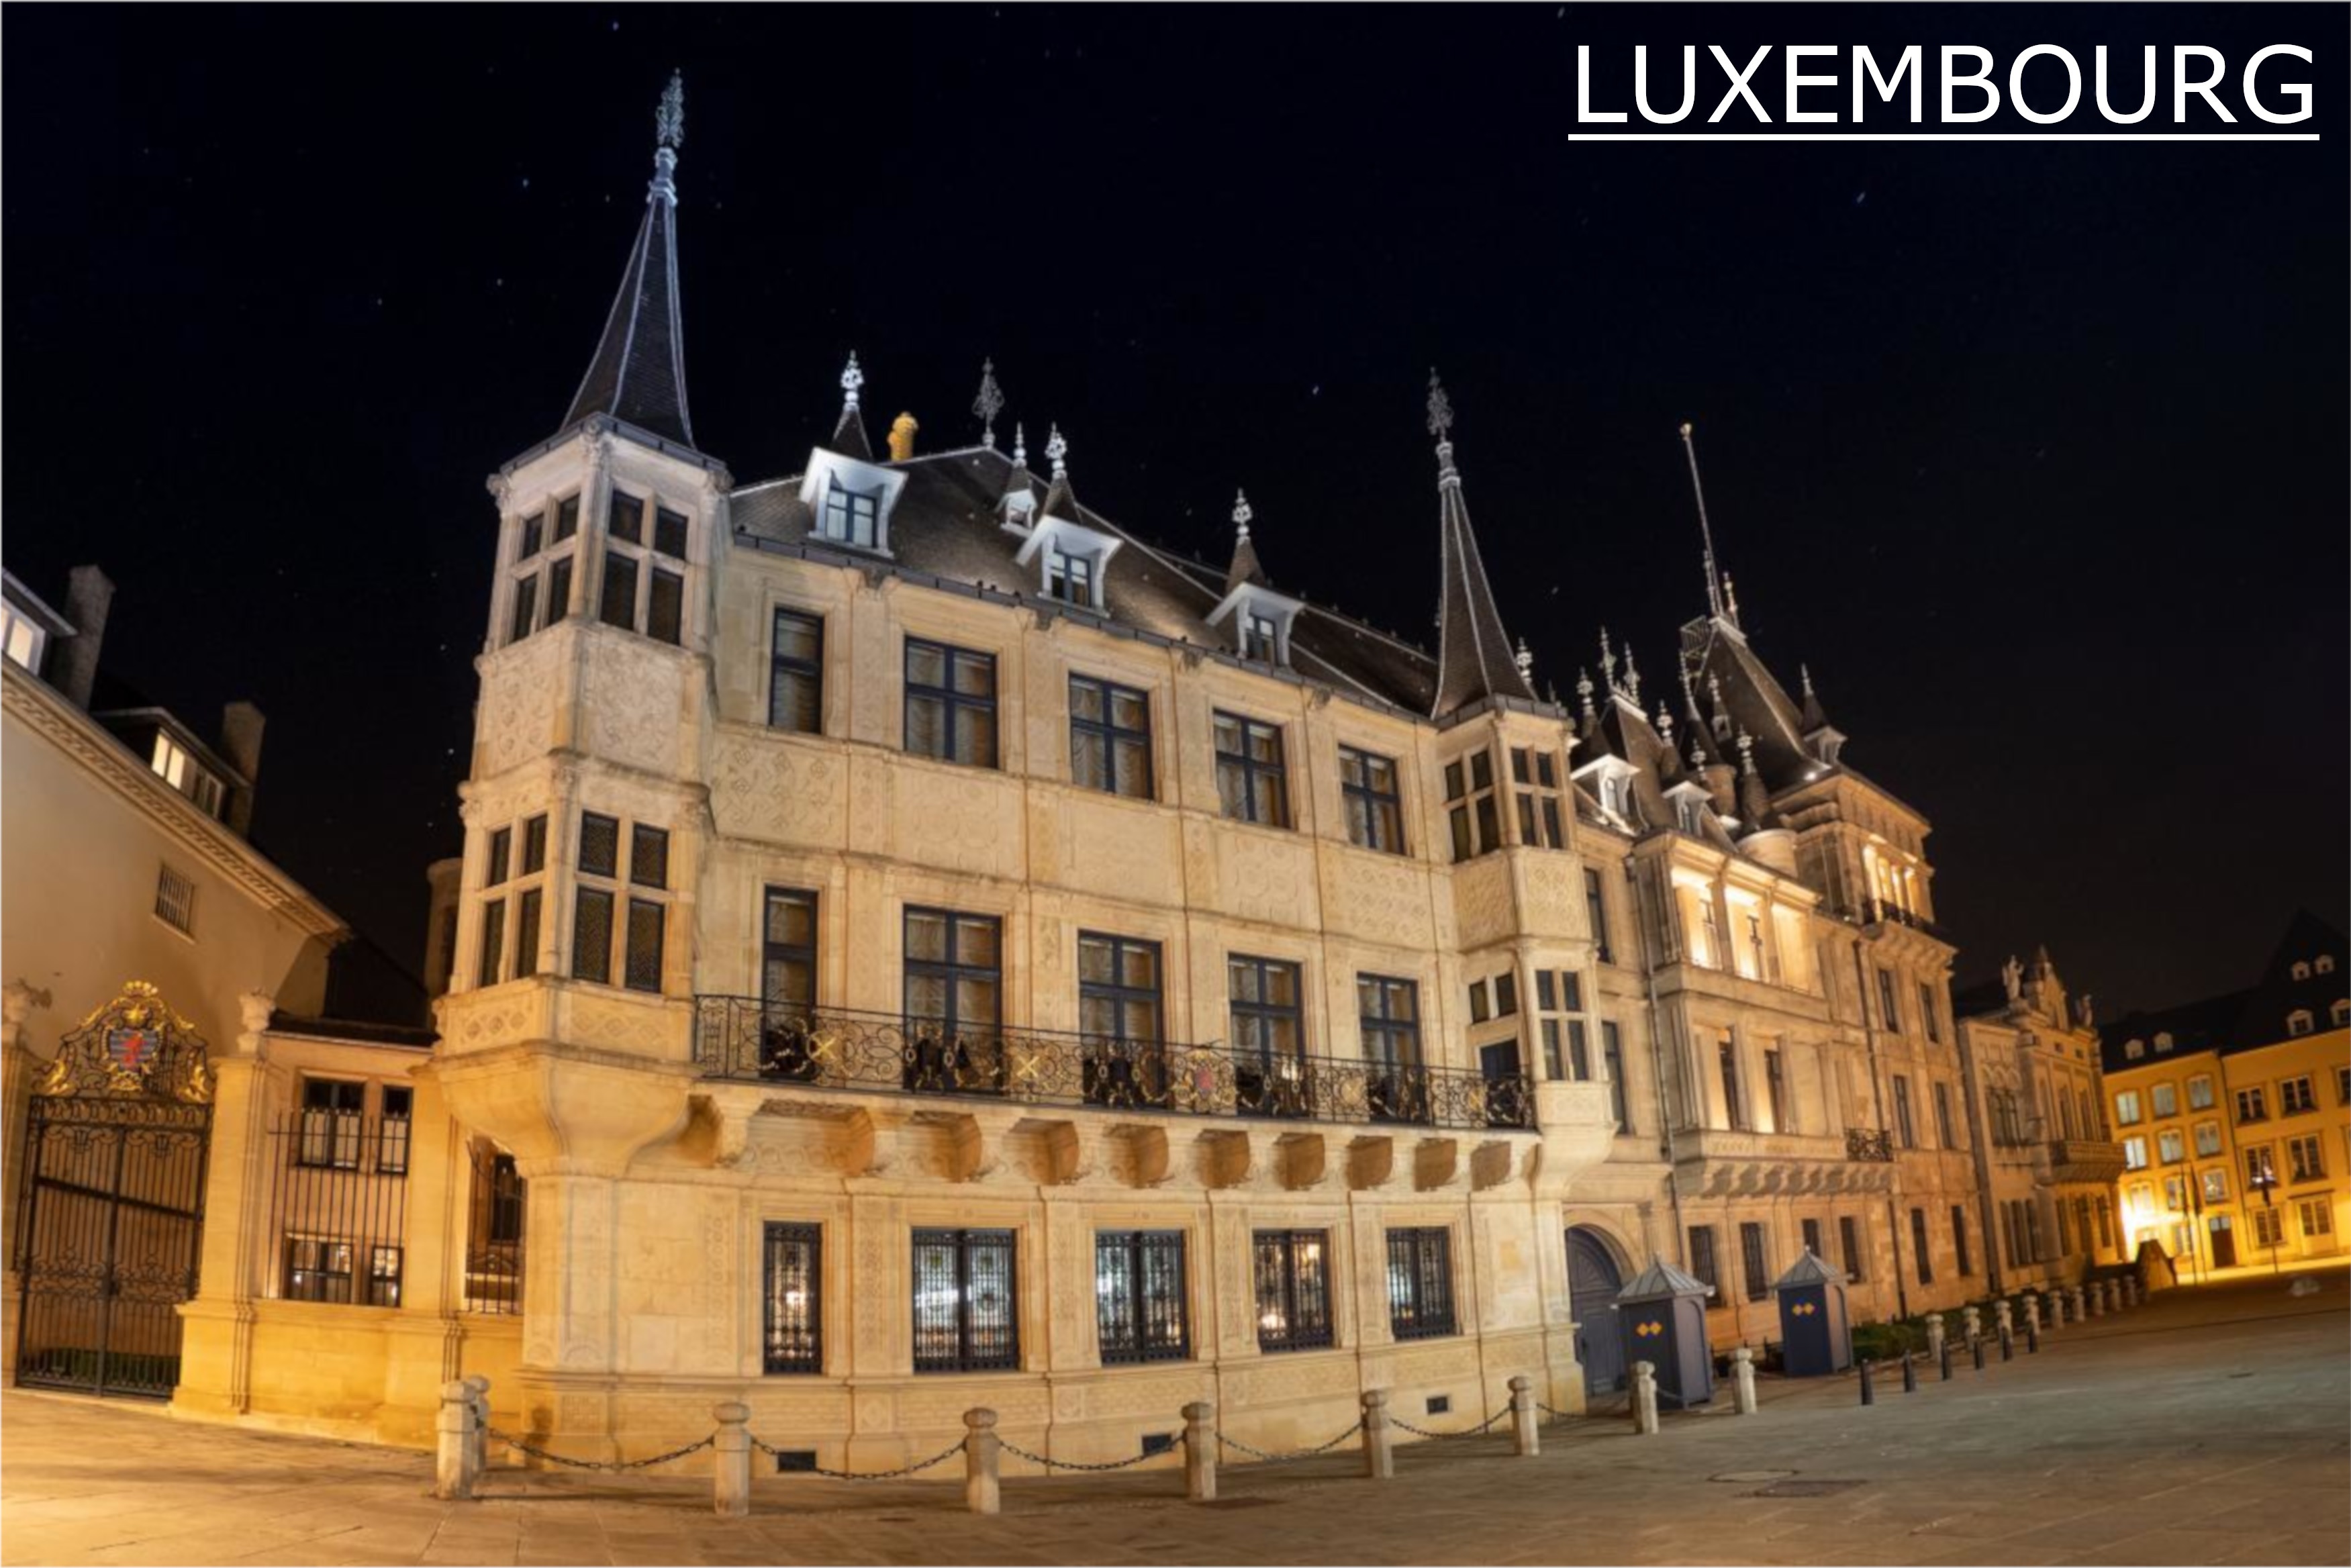 LUXEMBOURG'S GRAND-DUCAL PALACE